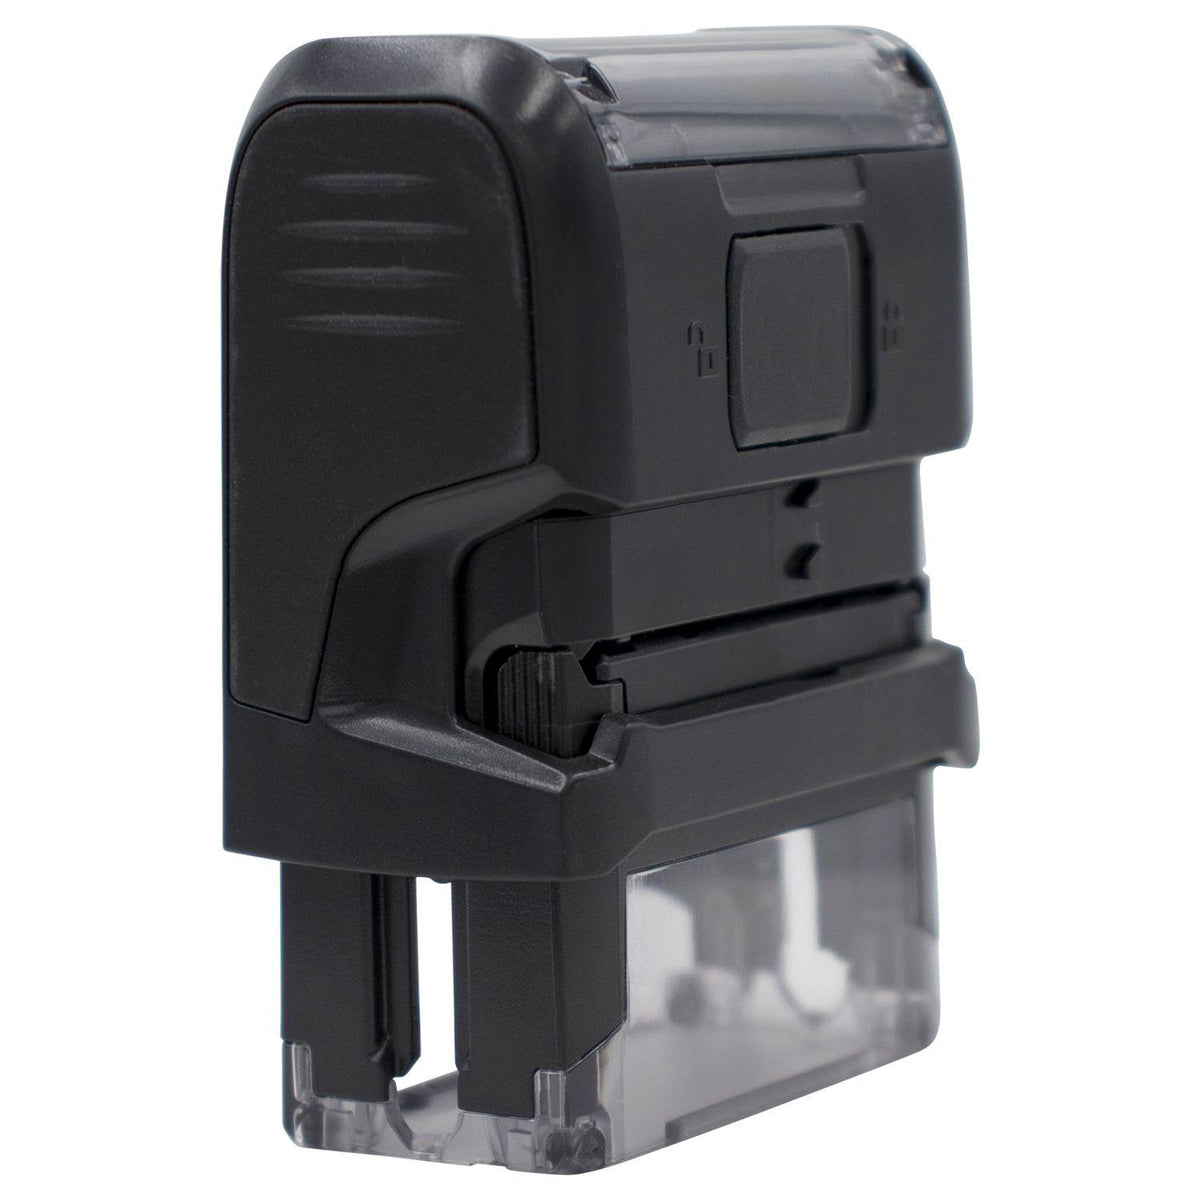 Self-Inking Do Not Bend Stamp - Engineer Seal Stamps - Brand_Trodat, Impression Size_Small, Stamp Type_Self-Inking Stamp, Type of Use_General, Type of Use_Postal &amp; Mailing